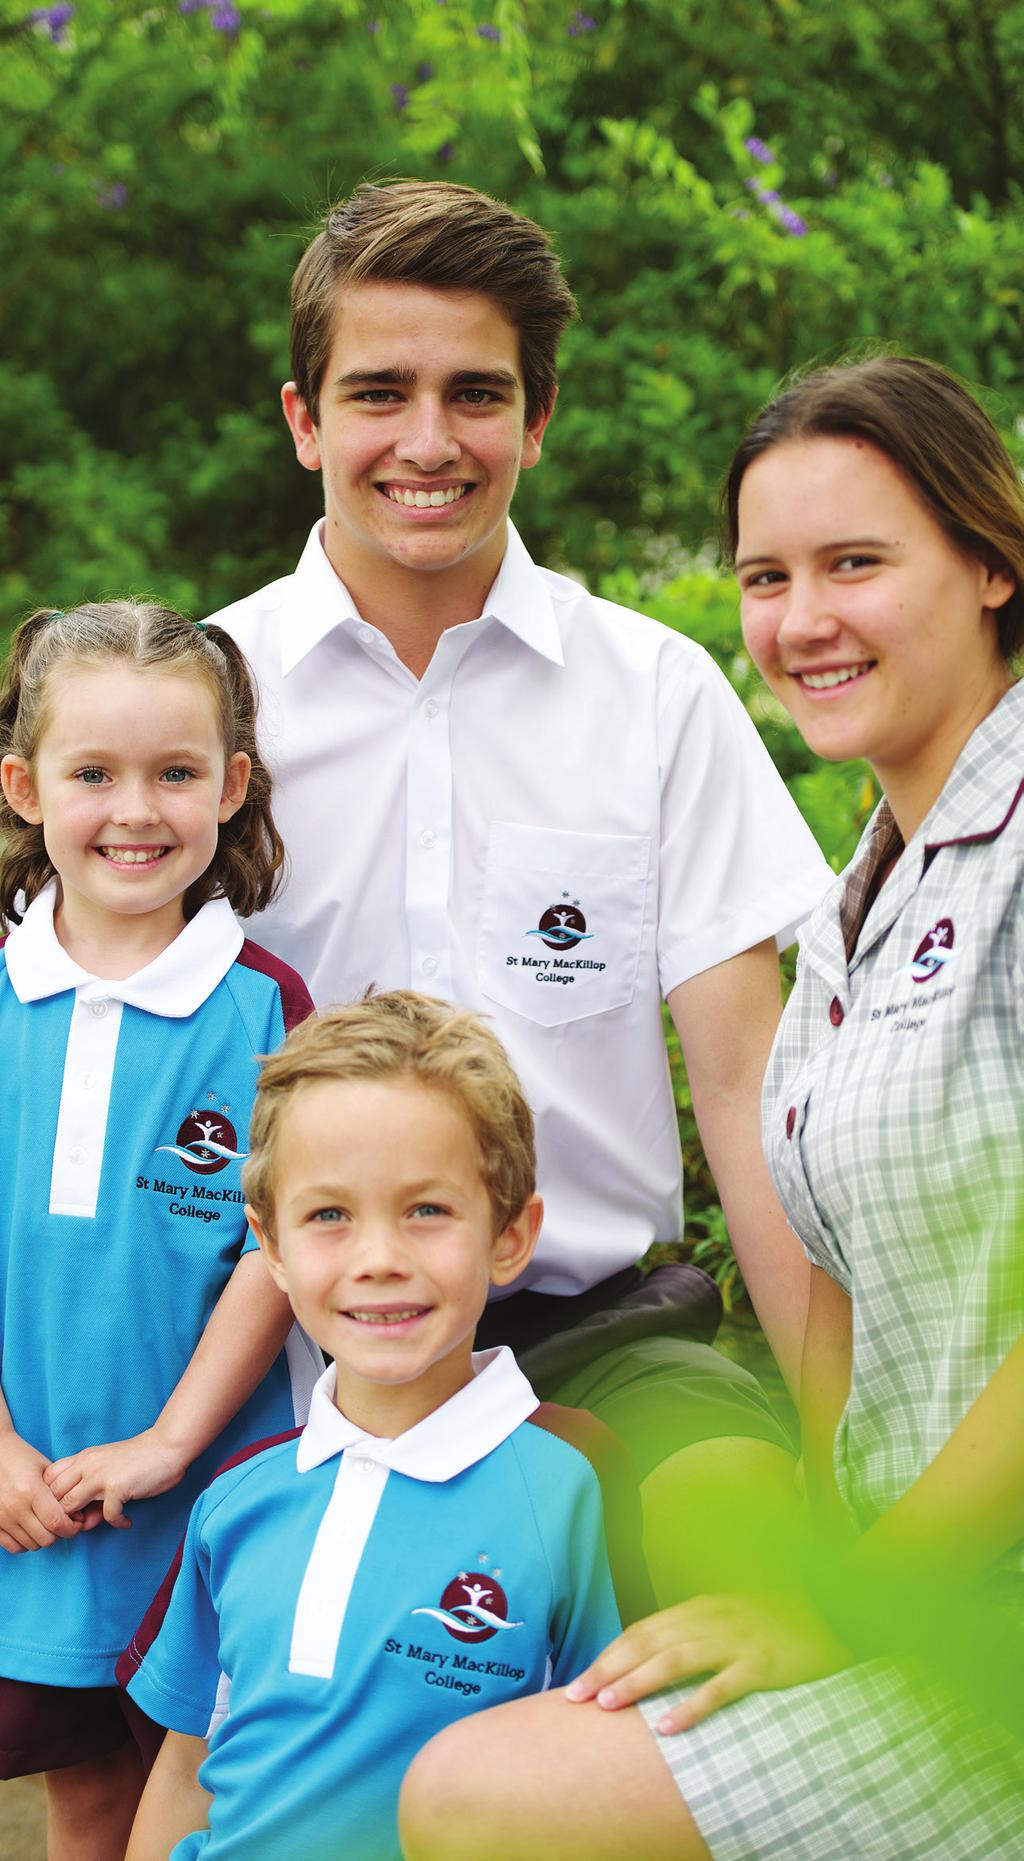 Our vision St Mary MacKillop College is committed to the traditions of the Sisters of St Joseph and their founder Mary MacKillop and the example they provide.